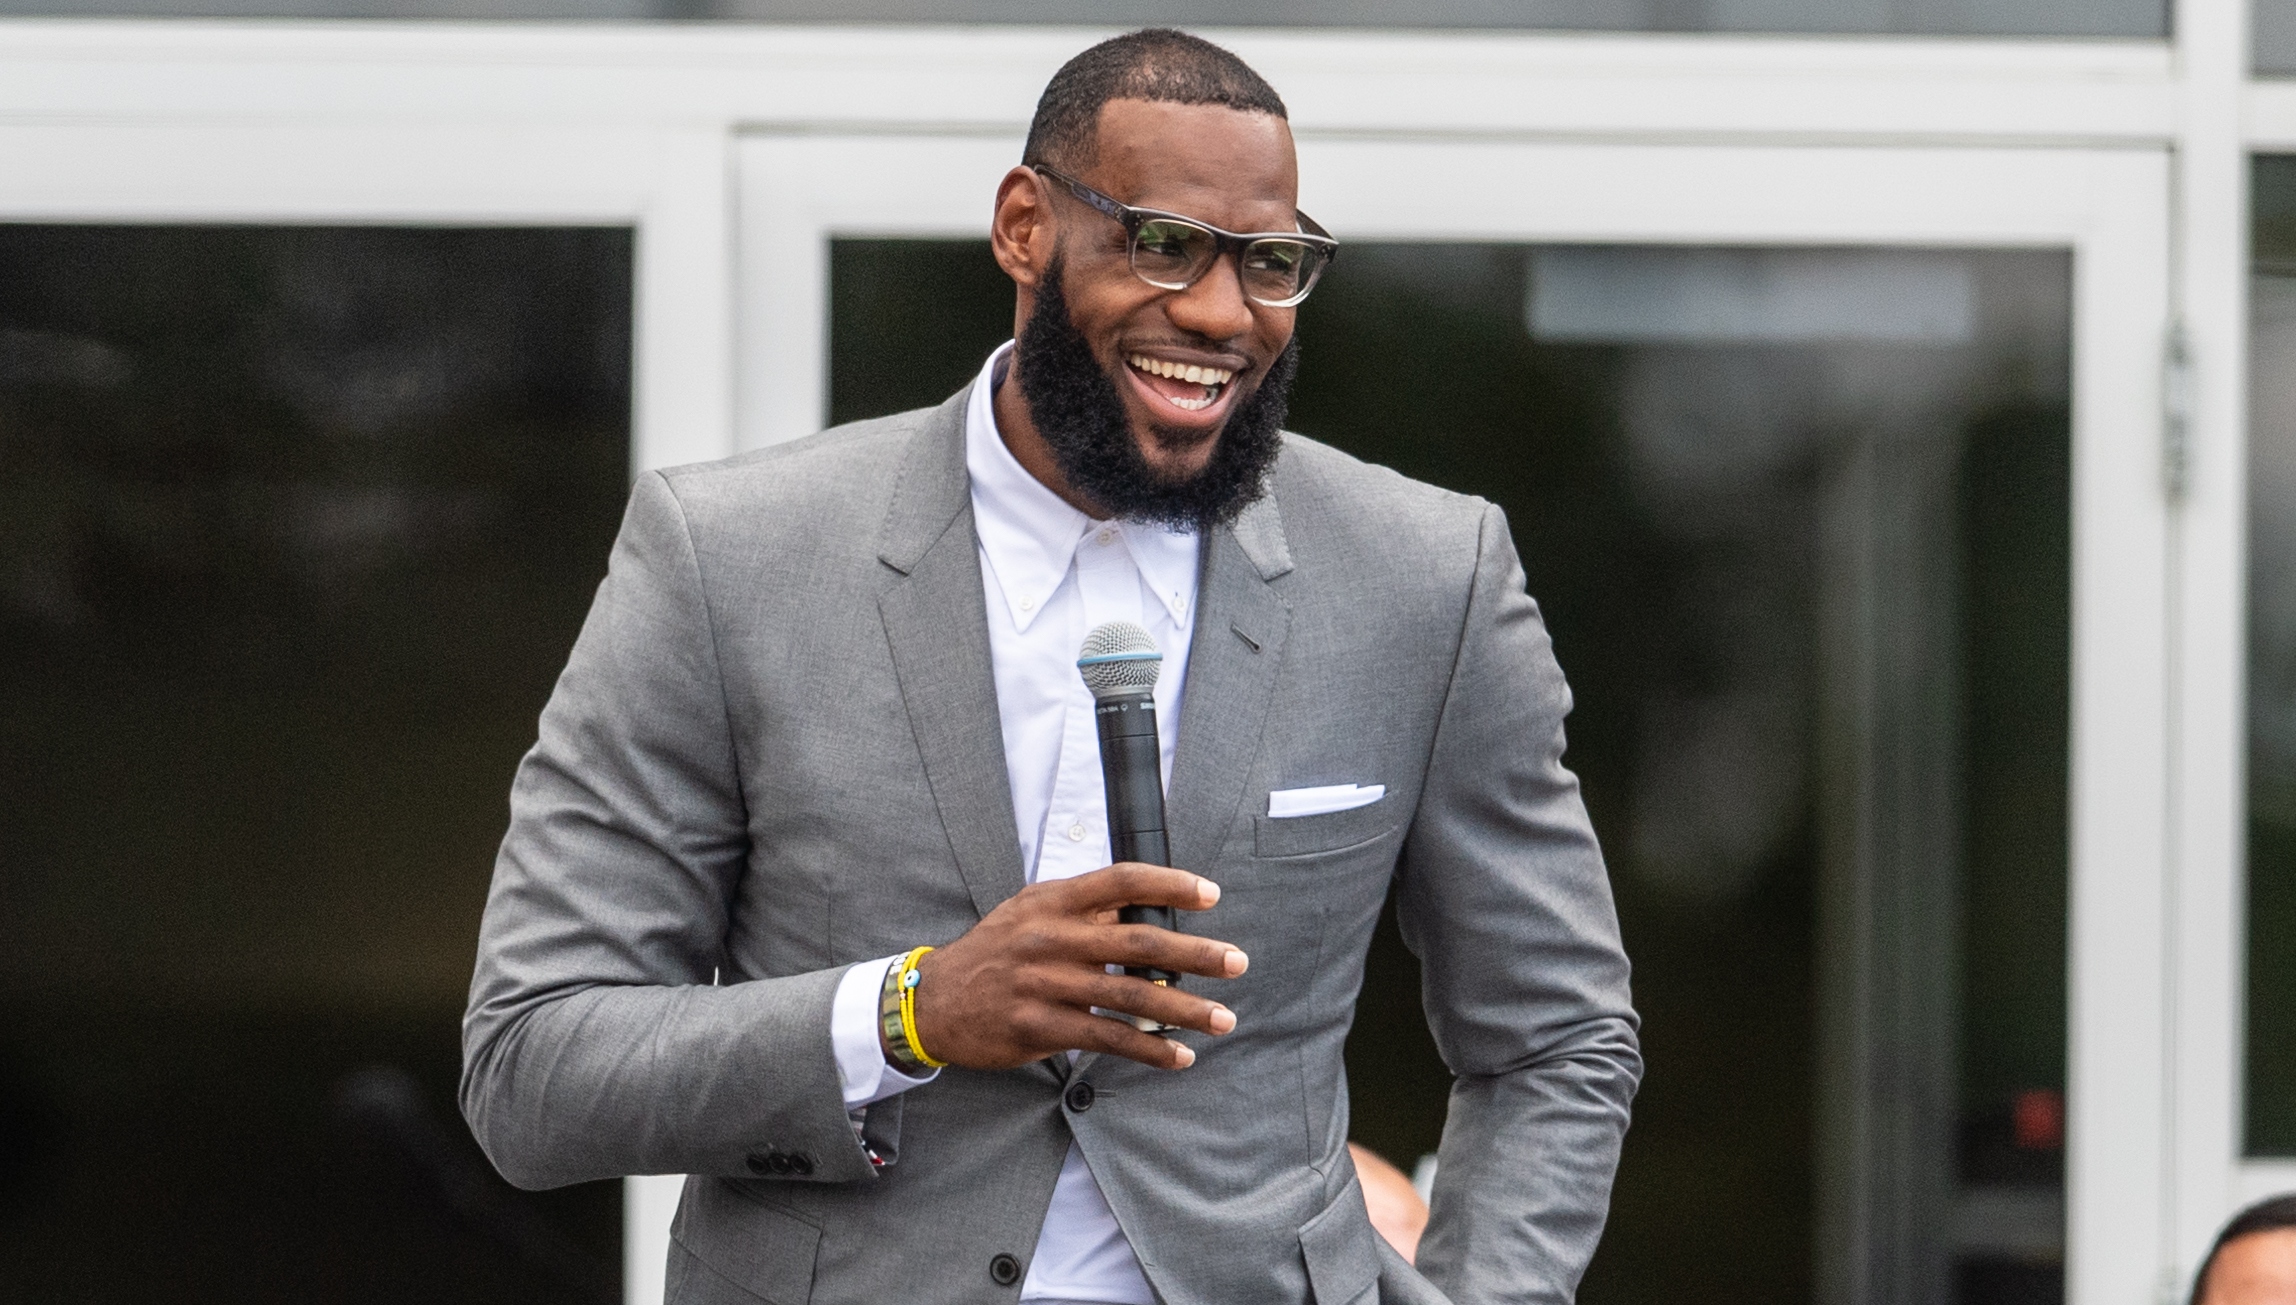 Nba News Lebron James I Promise School Another Reminder That He Is Much More Than An Athlete Sport360 News